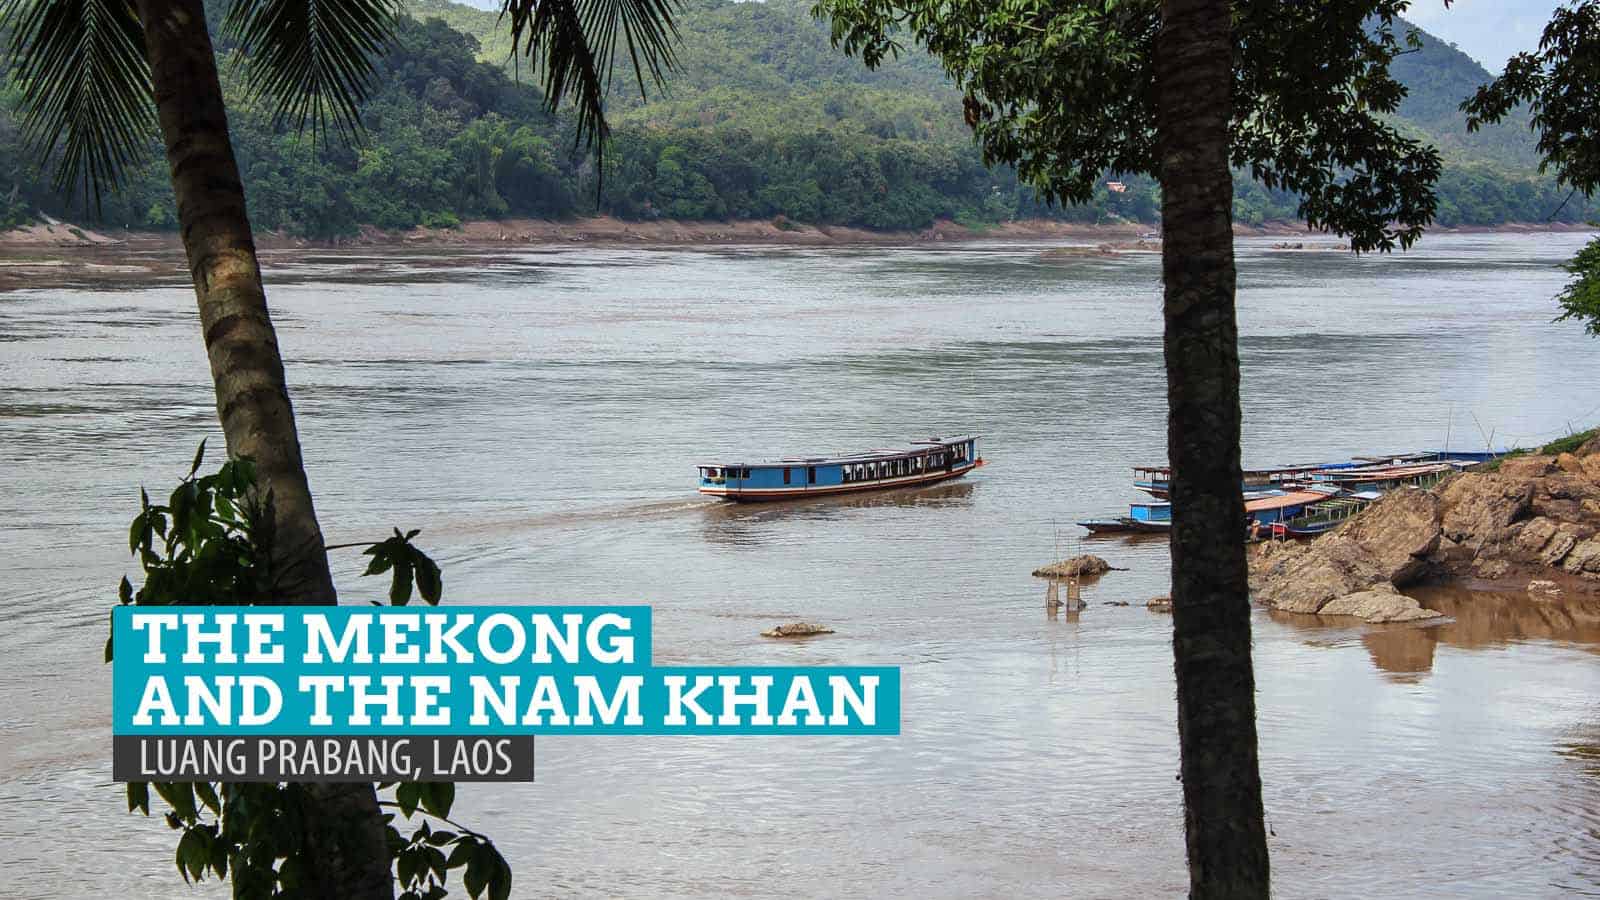 The Mekong and the Nam Khan: In the Company of the Two Rivers of Luang Prabang, Laos